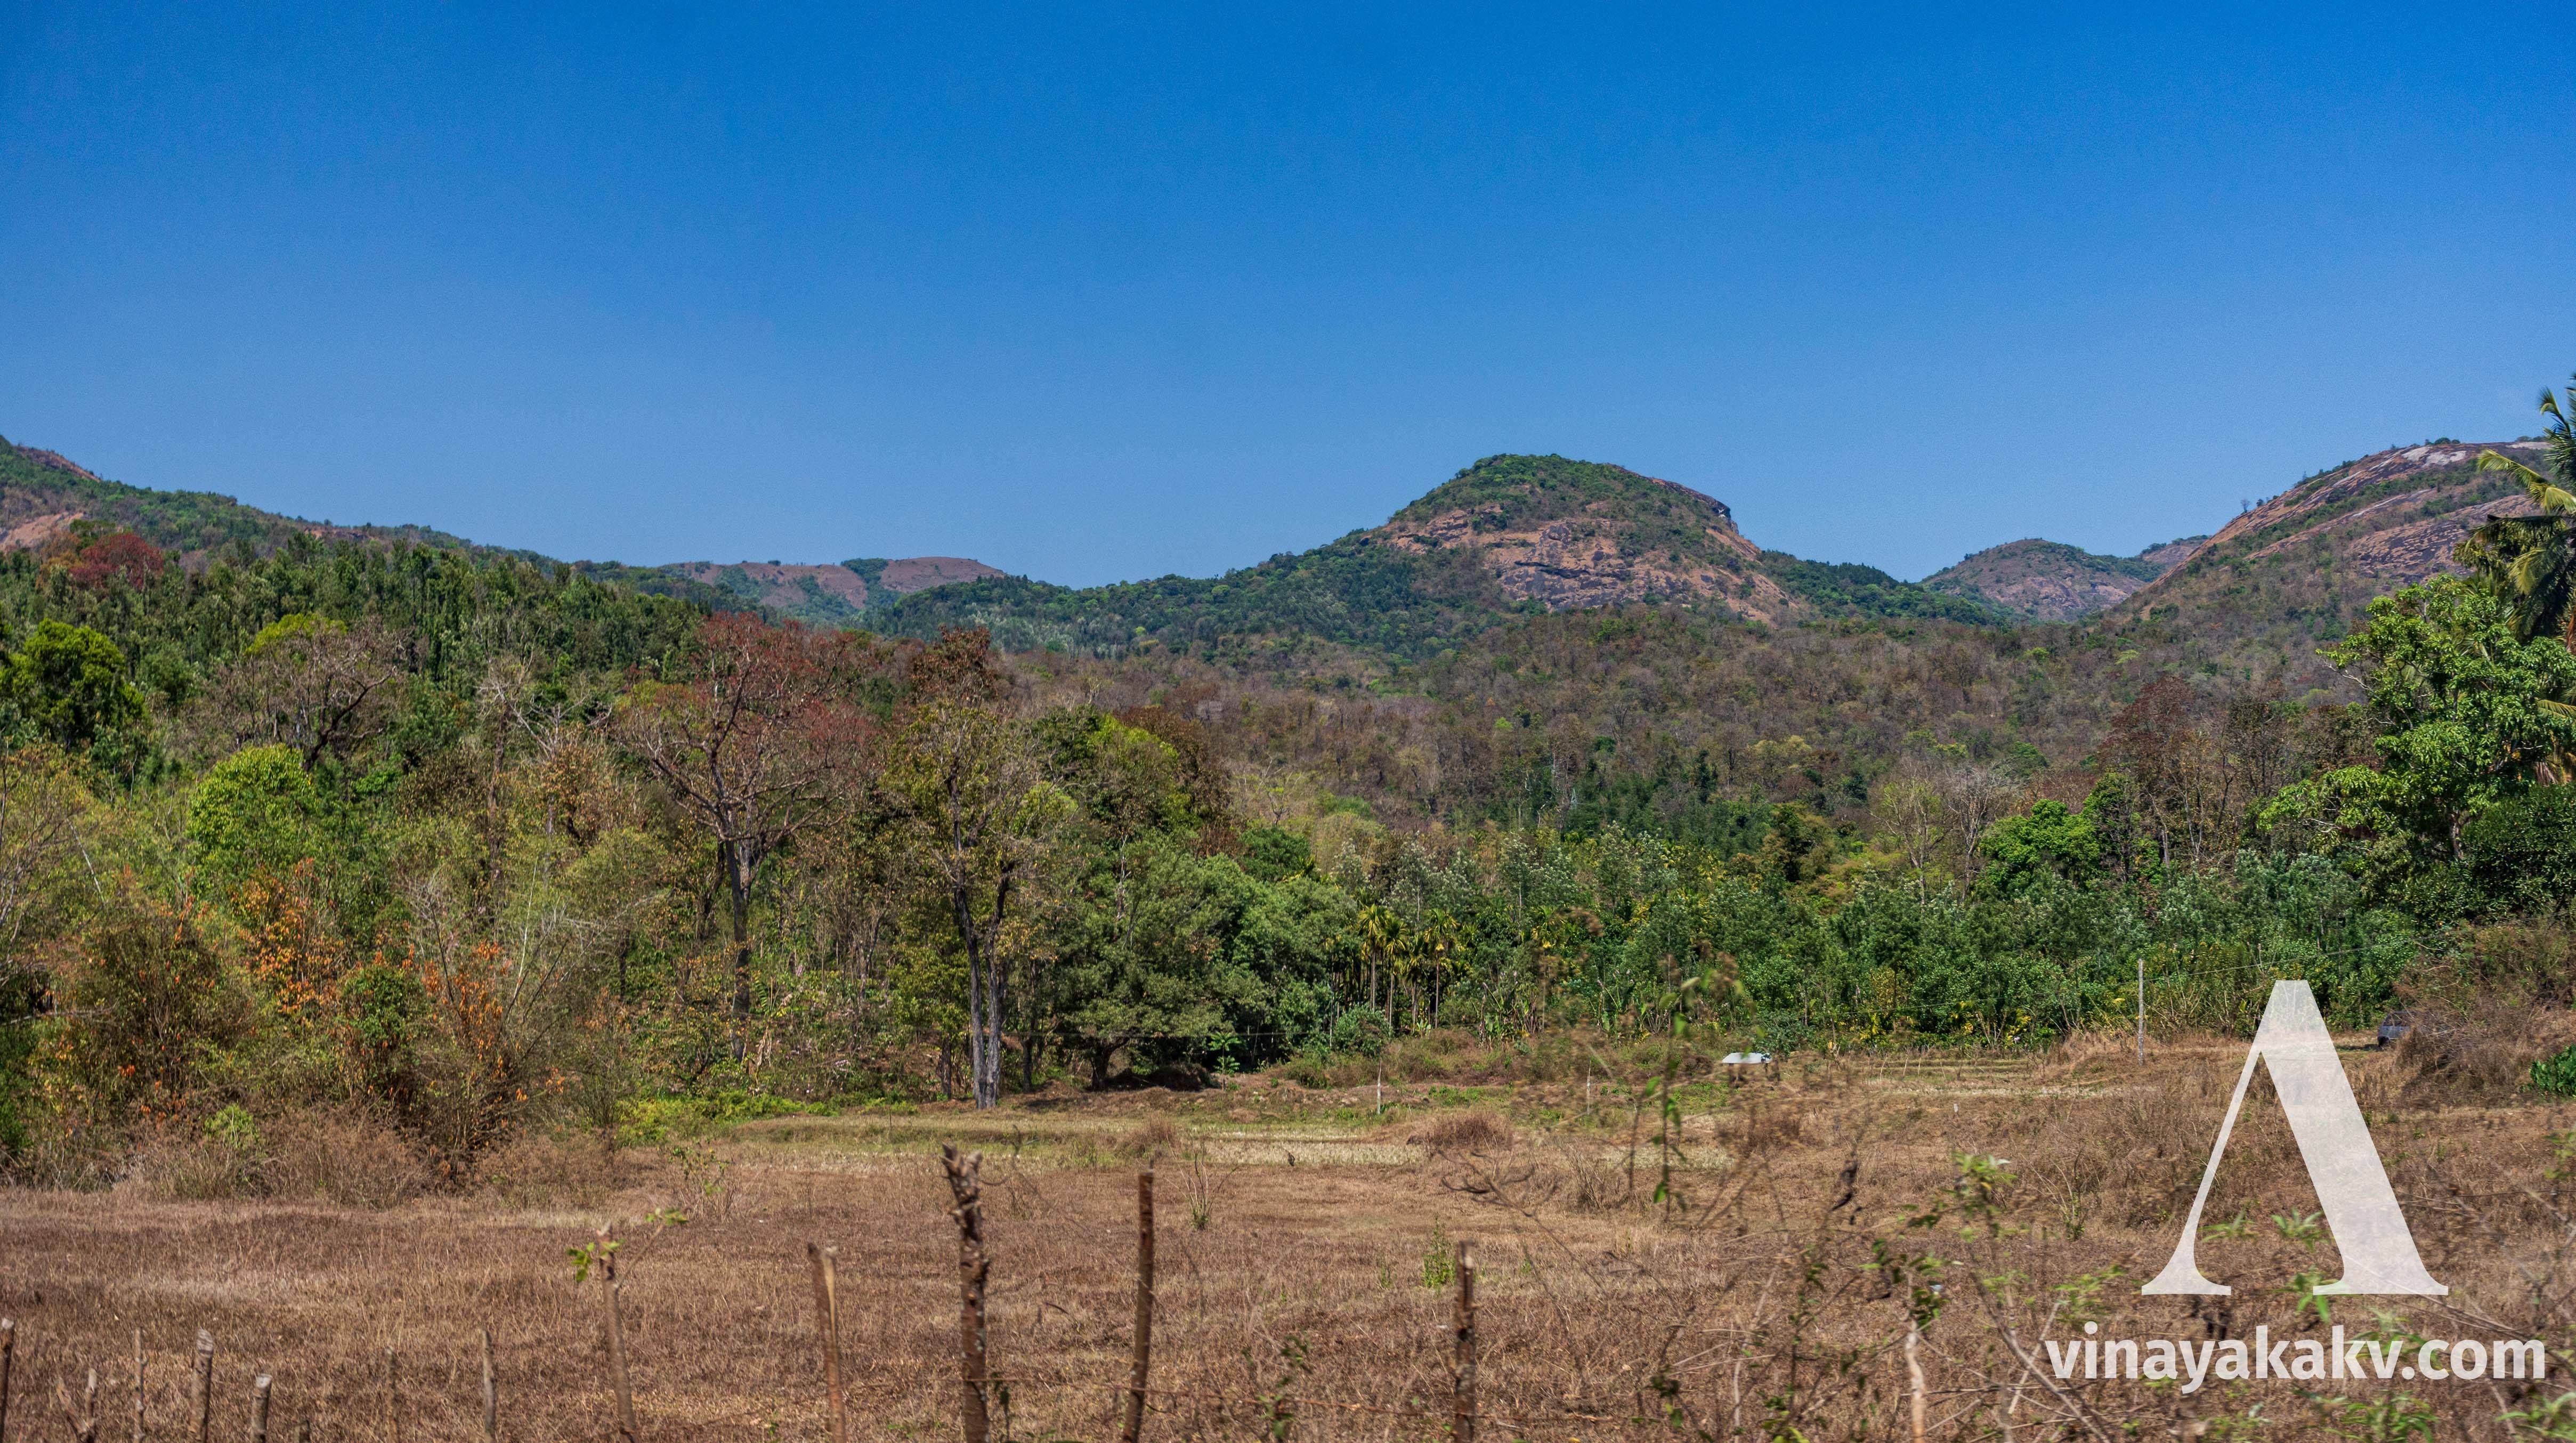 Rocky side ranges of _Chandradrona_ covered prominently with deciduous forests.